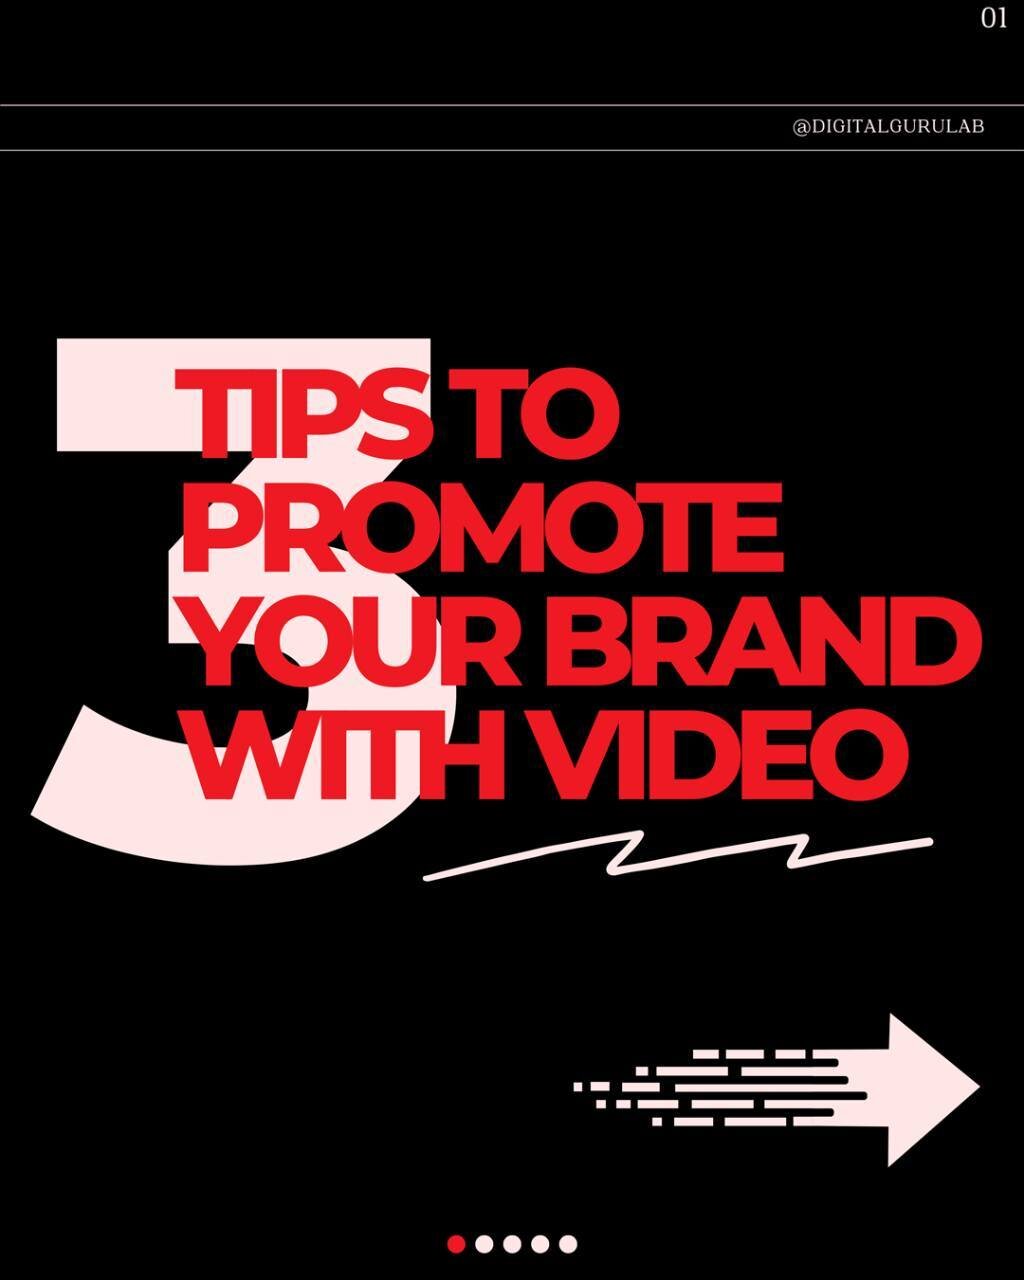 Sprinkle some video magic on your brand! 🌟🎬 Here's a handful of easy-peasy tips to turn heads and amp up your brand game. Let's get that buzz going! 🚀
-
-
-
-
-
#marketing #marketingdigital #marketingstrategy #marketingtips #marketingagency #marke